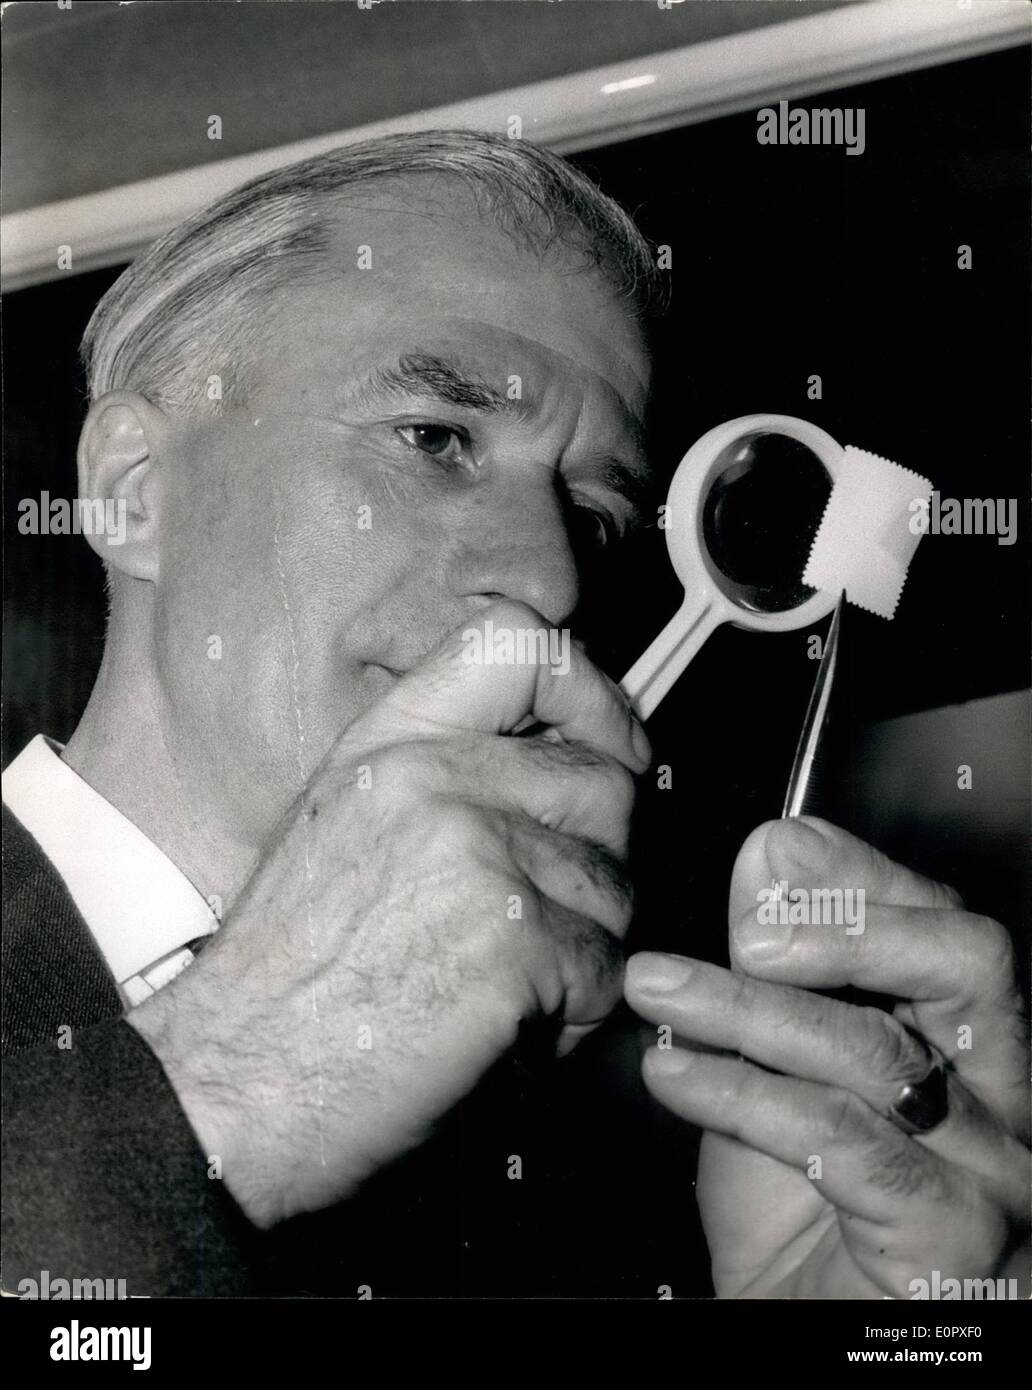 Apr. 04, 1957 - National Stamp exhibition. The 15th. Annual National Stamp Exhibition, known as ''Stampex'', was opened today by the Postmaster General, Mr. Edward Short, M.P., at the Central Hall, Westminster. Photo shows Mr. Edward Short, M.P., the Postmaster General, seen examining a rare Swiss stamp, when he toured the exhibition today. Stock Photo